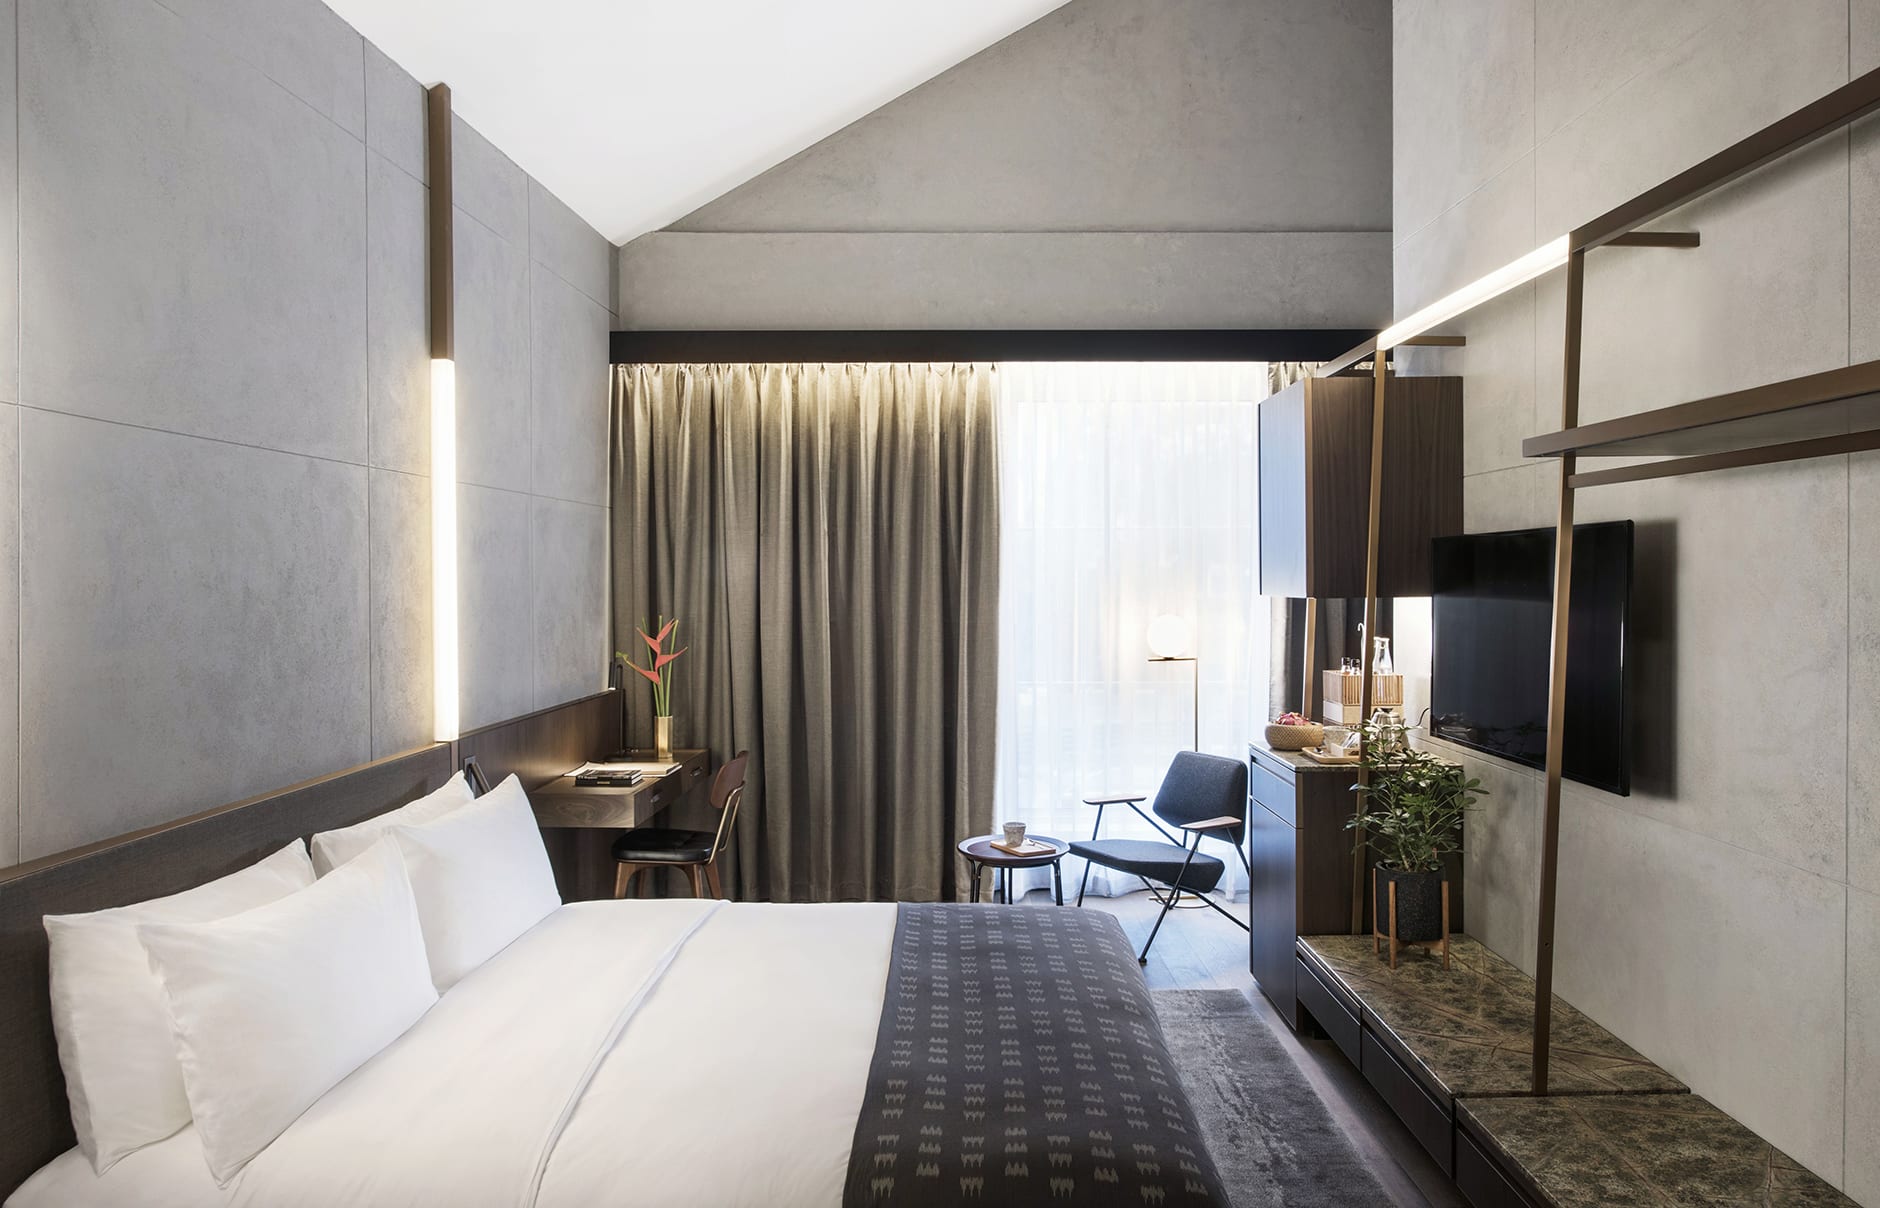 The Warehouse Hotel, Singapore. Hotel Review by TravelPlusStyle. Photo © The Warehouse Hotel